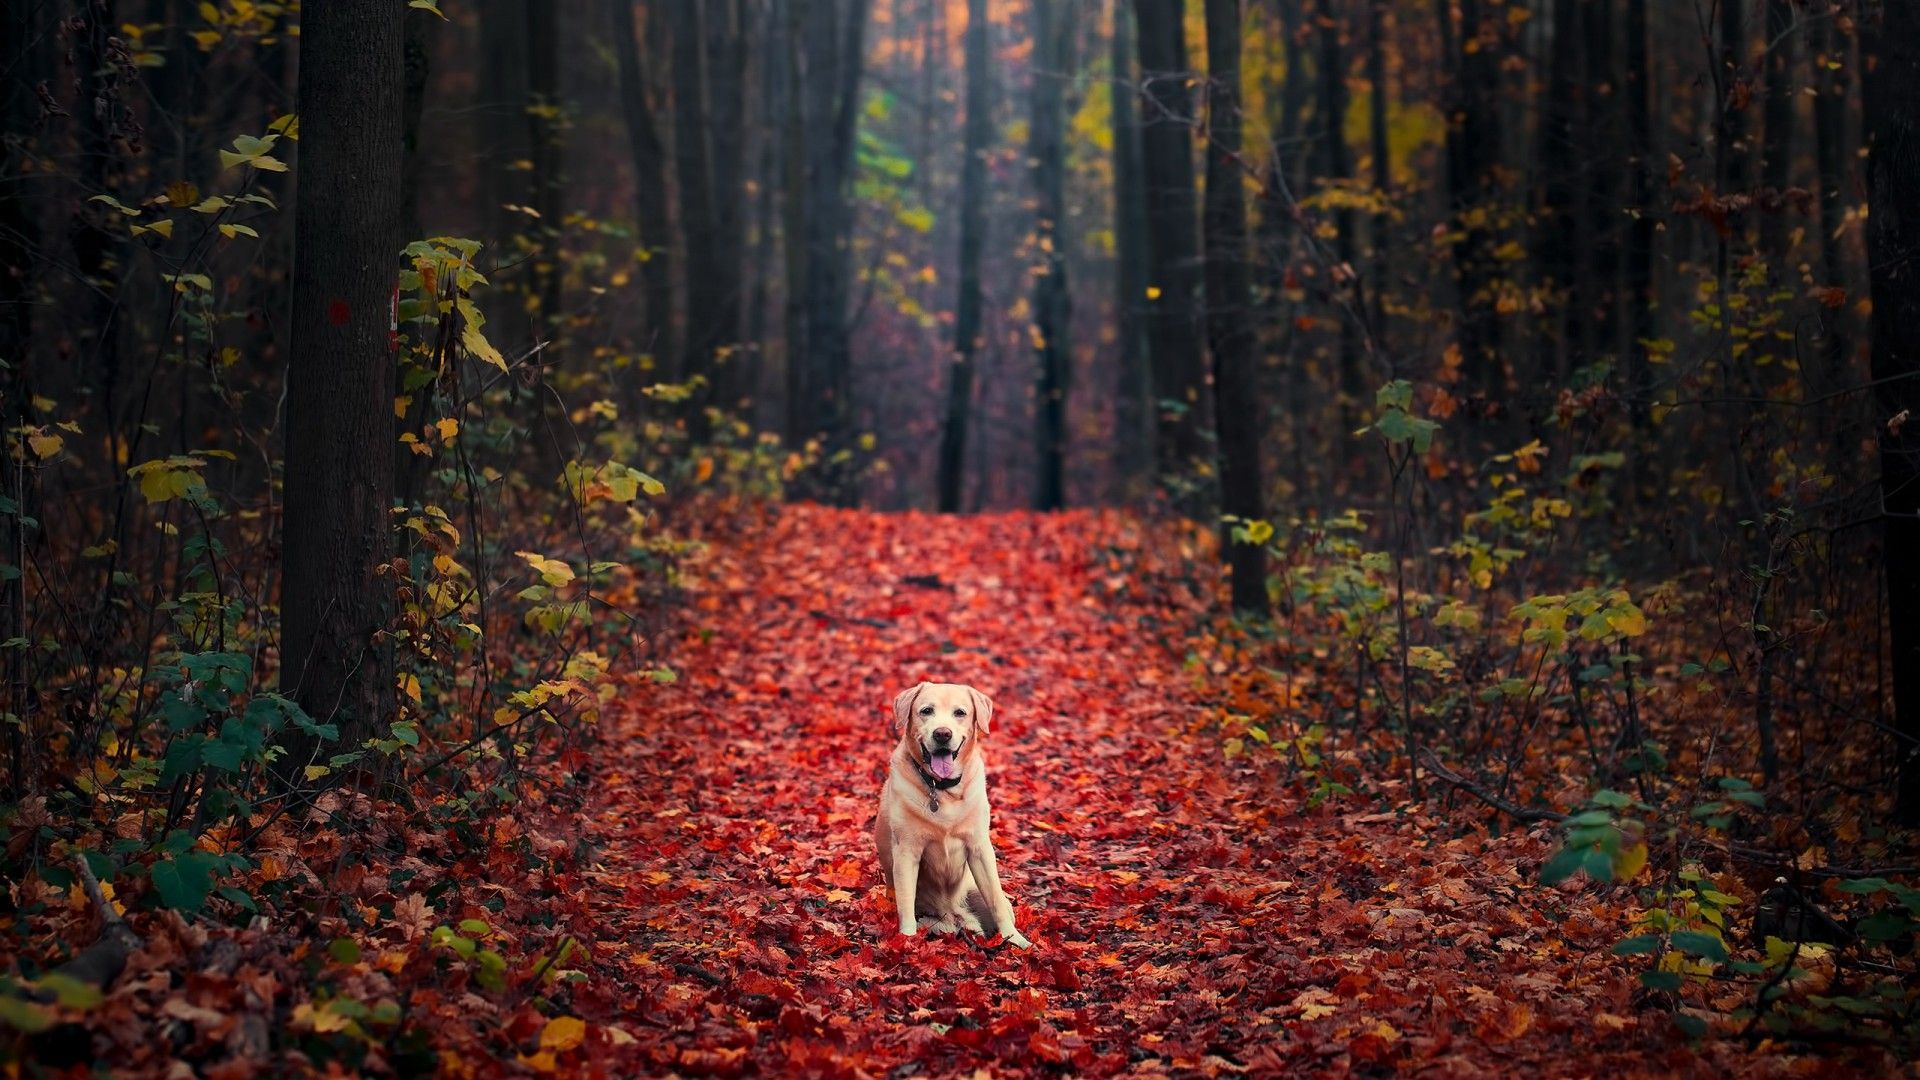 Download wallpaper of Labrador Retriever, Autumn, Foliage, Forest, HD, Animals,. Available in HD, 4K res. Labrador retriever, Autumn forest, Dog background